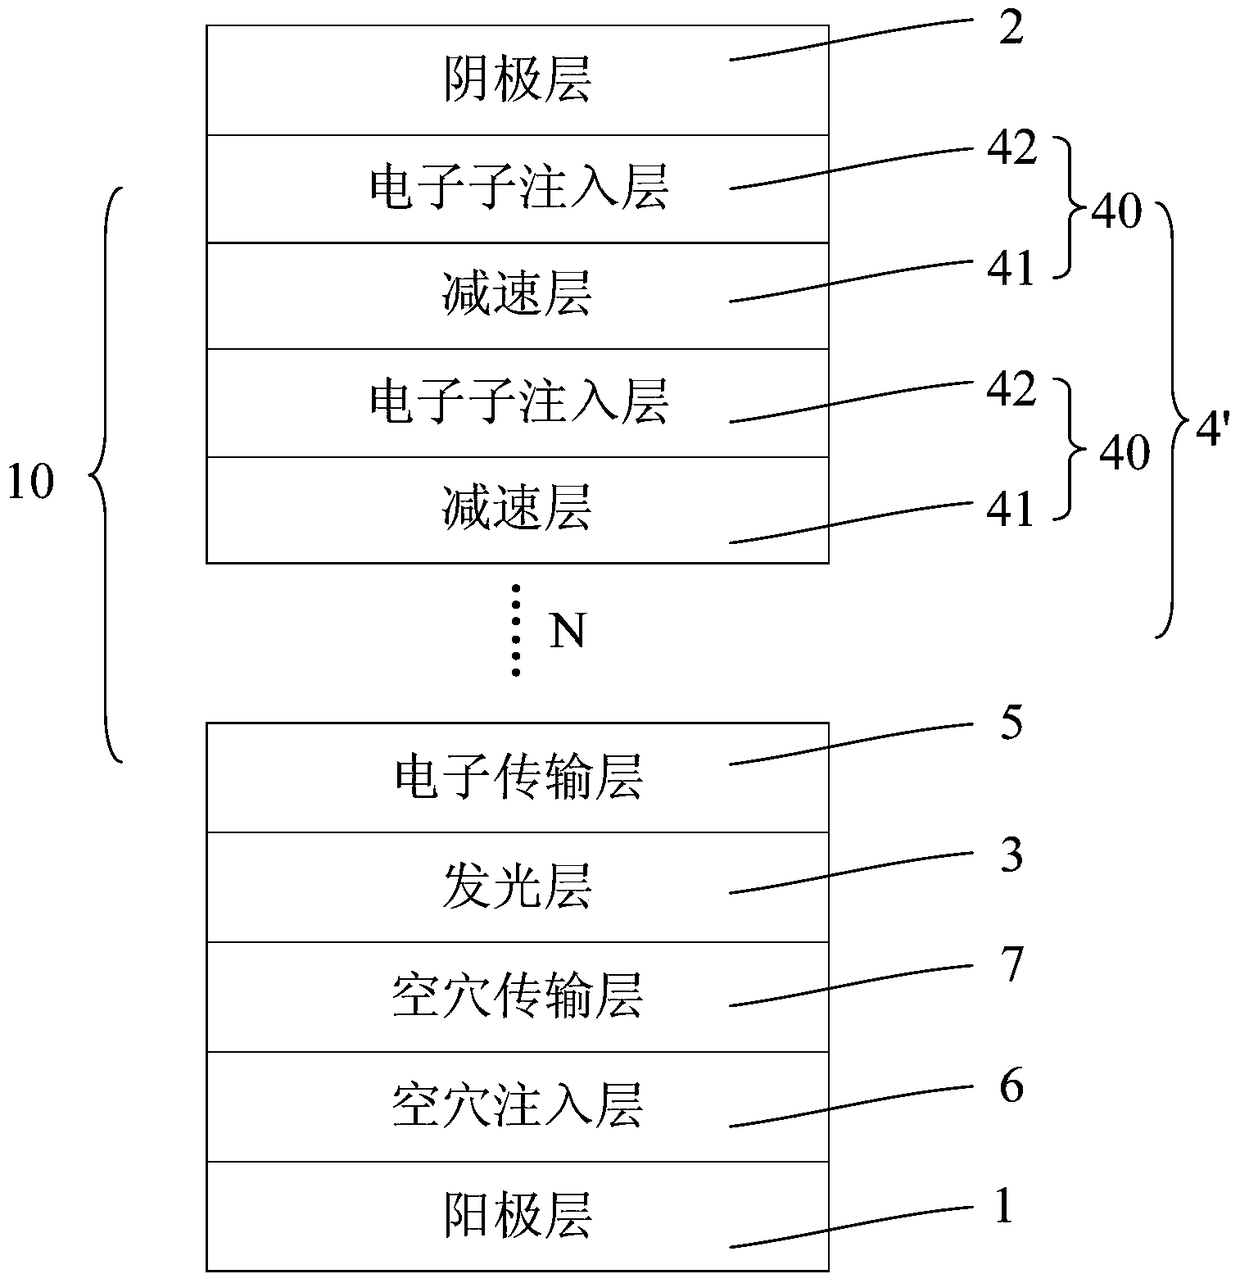 Organic electroluminescent device, its manufacturing method, and display device